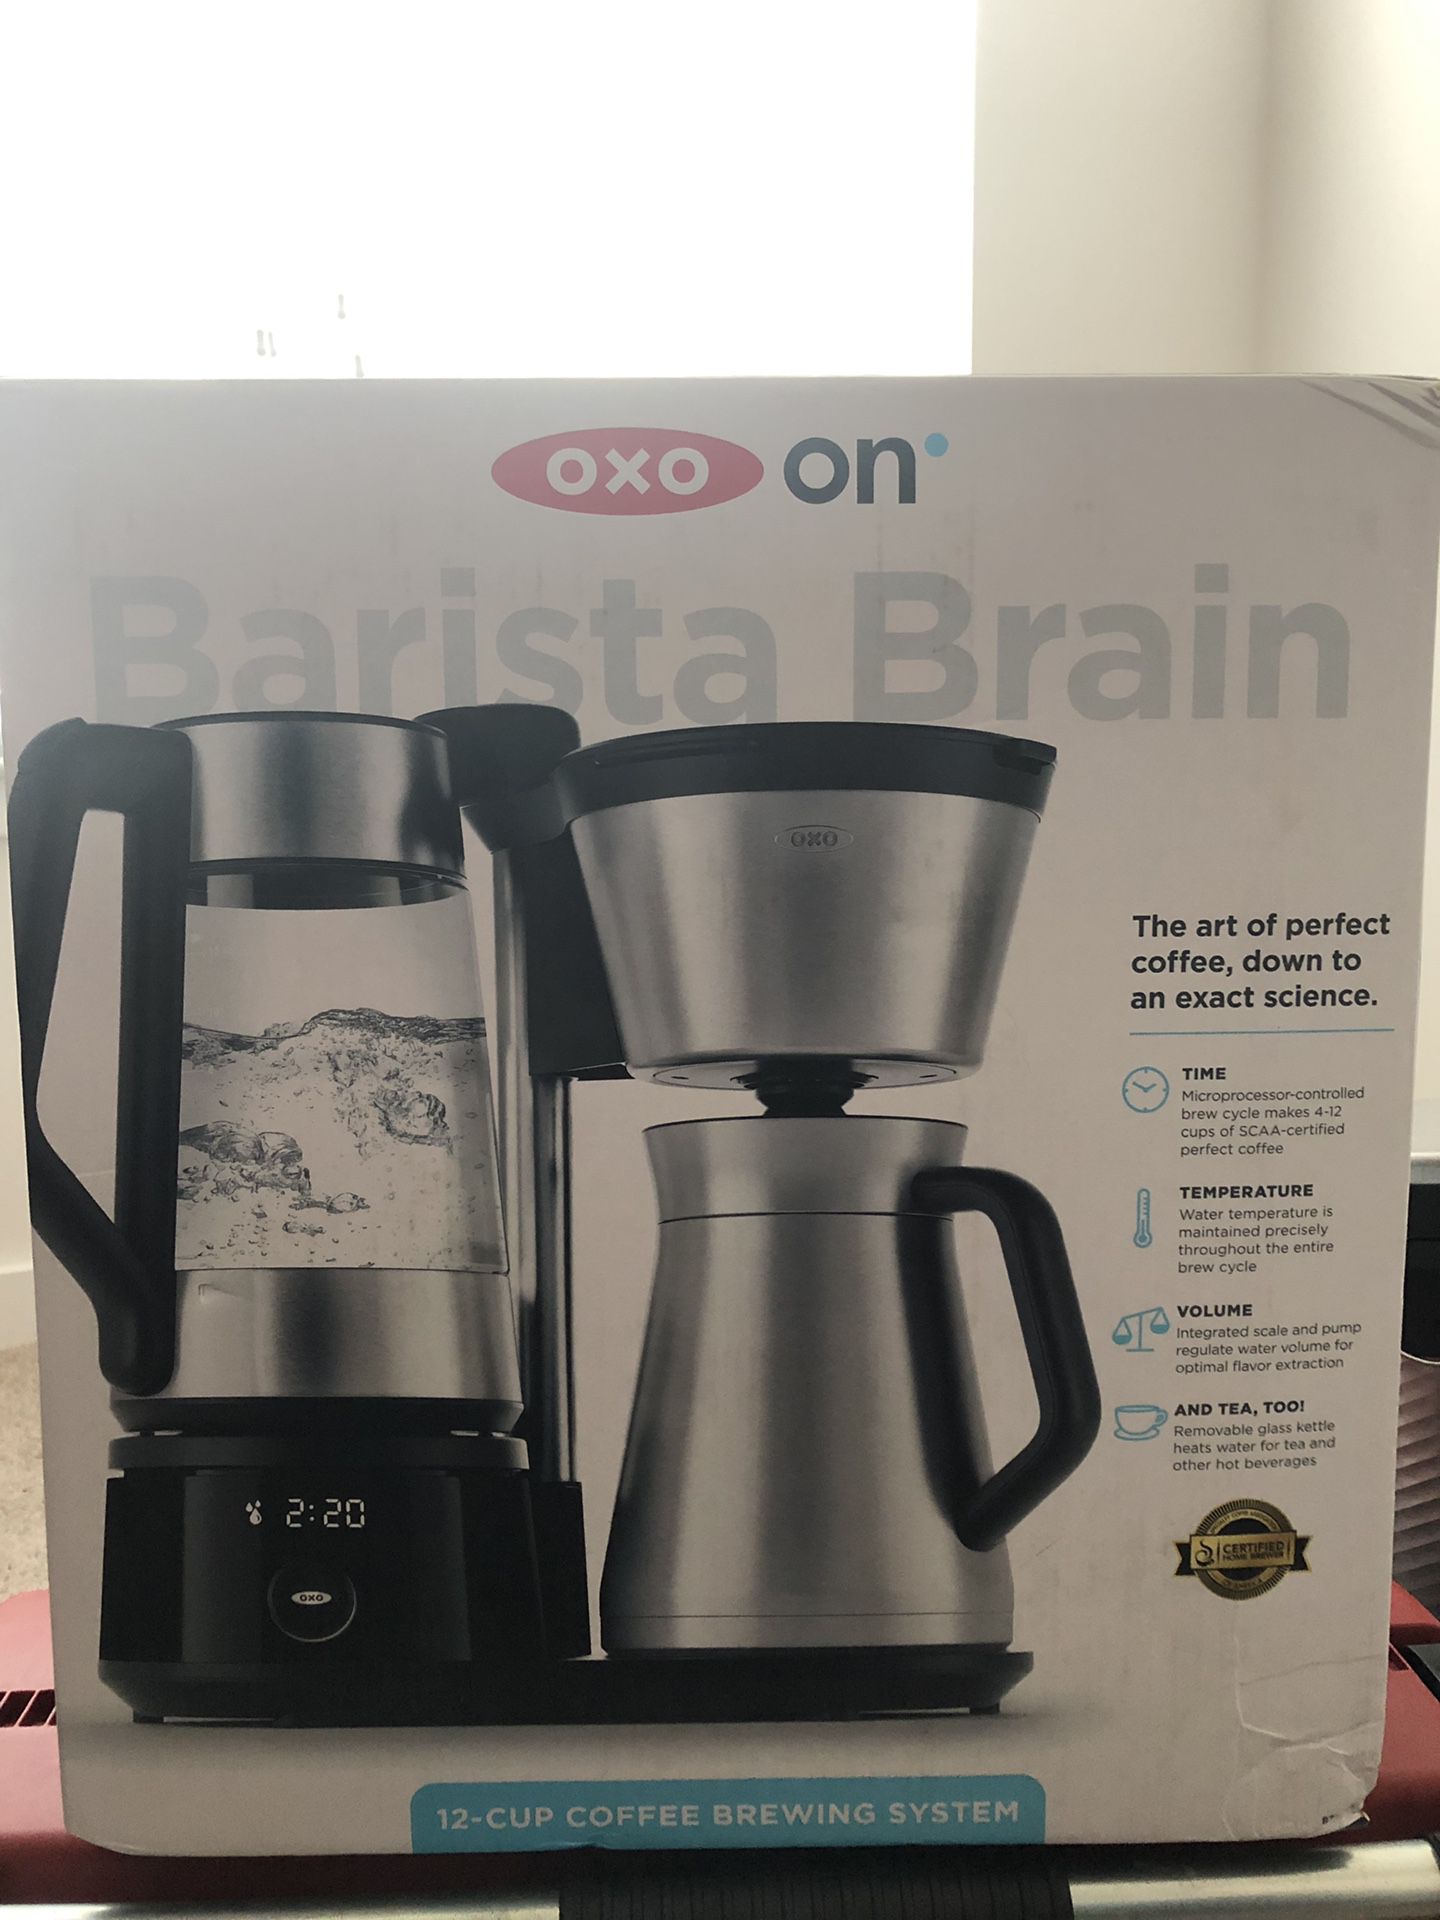 Brand new OXO On Barista Brain 12-Cup Coffee Maker